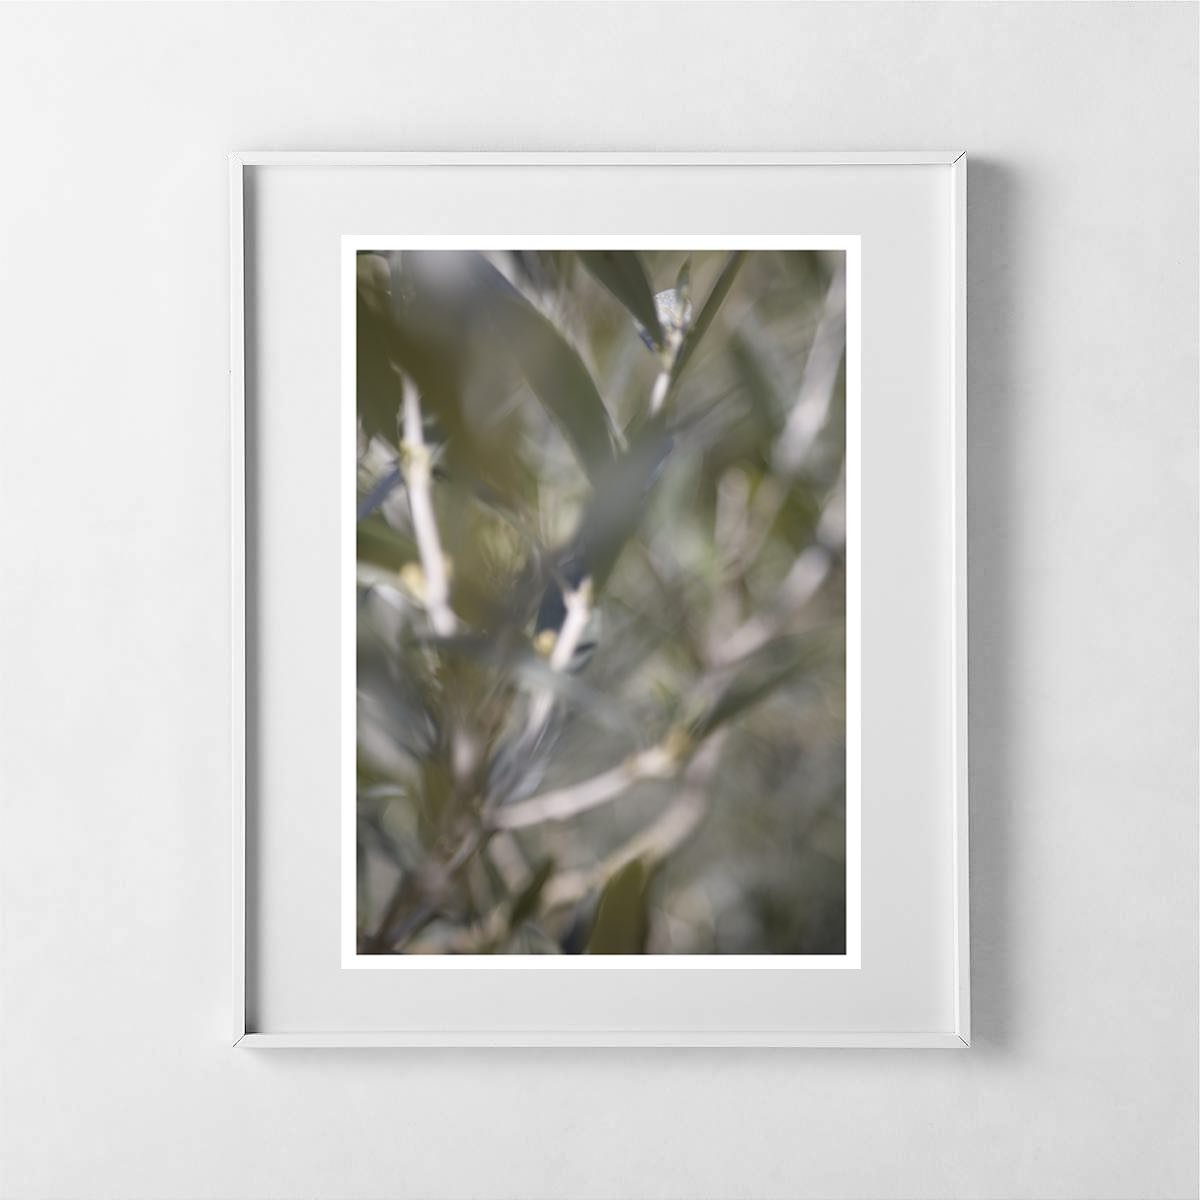 This is &ldquo;Moraiolo&rdquo;. It is an A4 gicl&eacute;e photographic print of an olive tree on 310gsm matt paper. 

It&rsquo;s &pound;35 unframed + &pound;5 PP within the UK. (&pound;30 each + &pound;5 PP for two or more).

100% profit (approx. &po